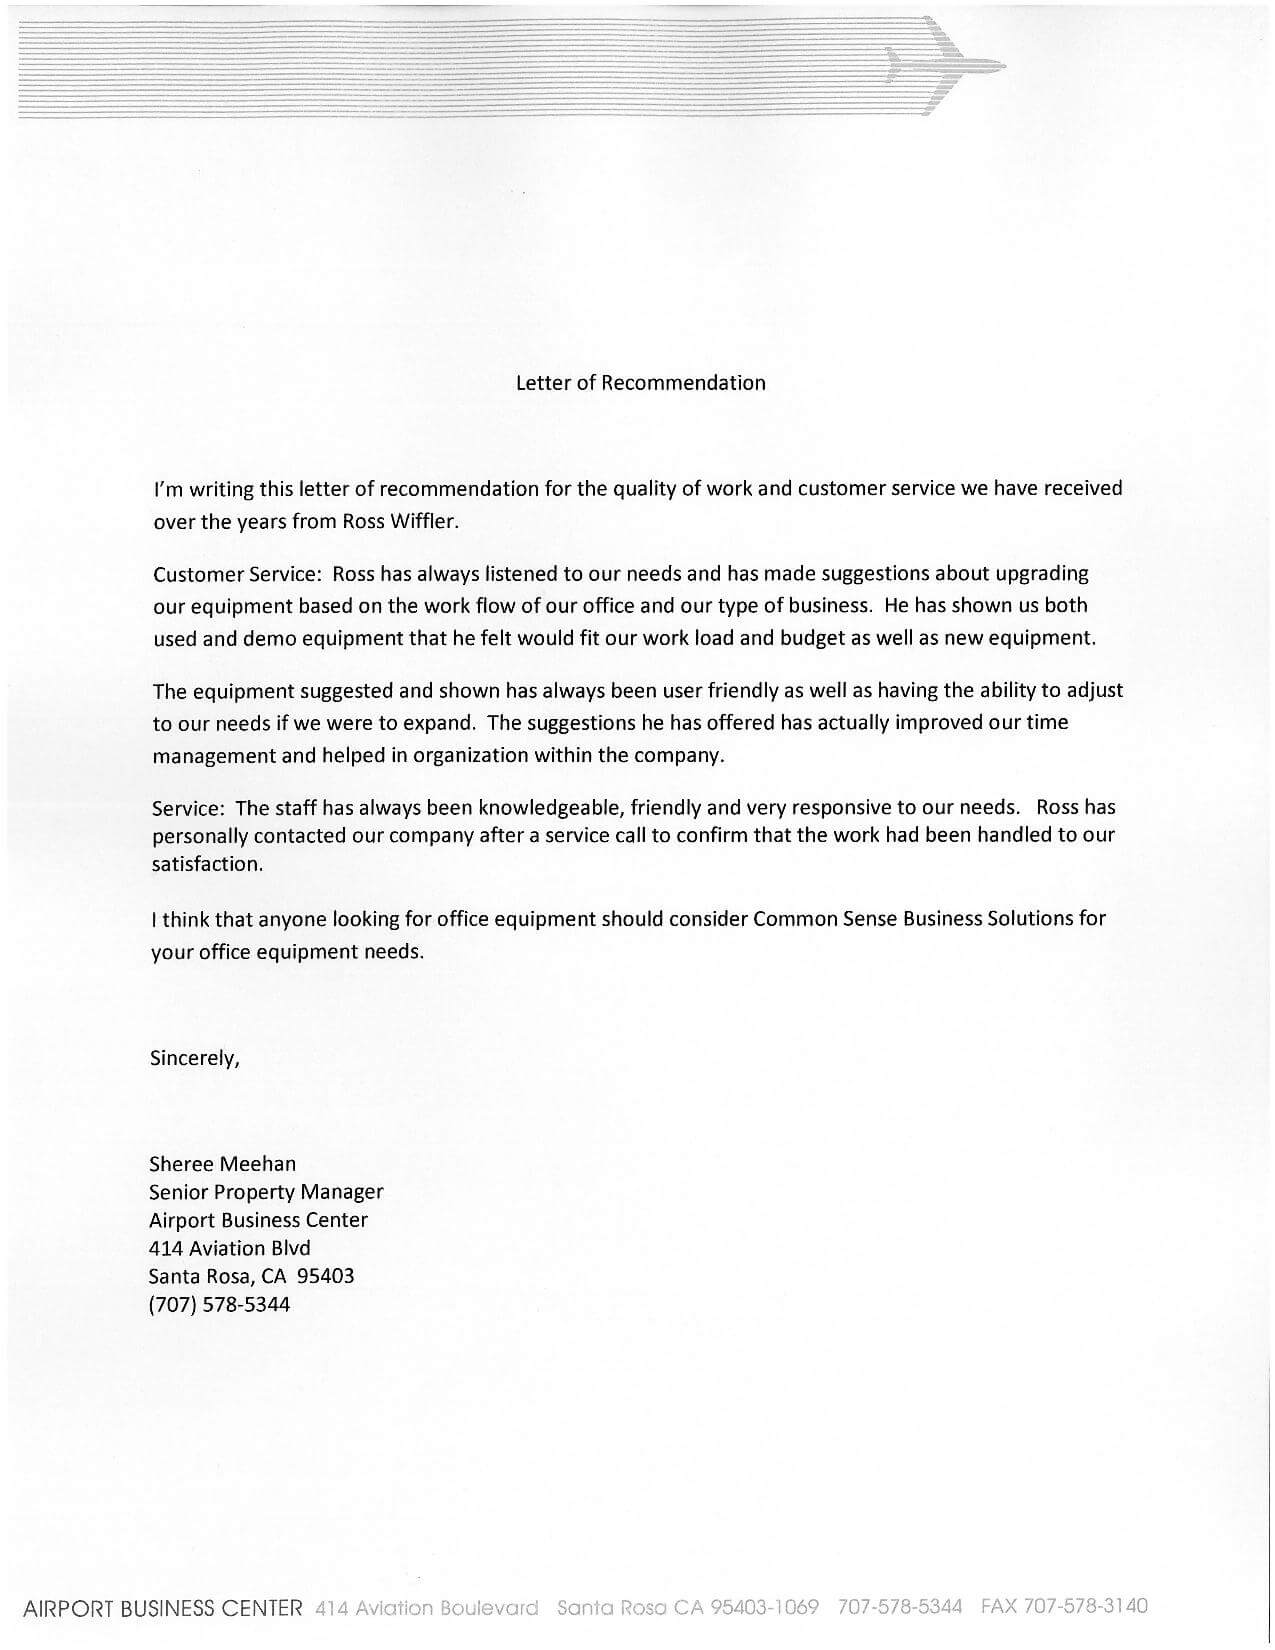 Testimonial Letters | Common Sense Business Solutions With Business Testimonial Template